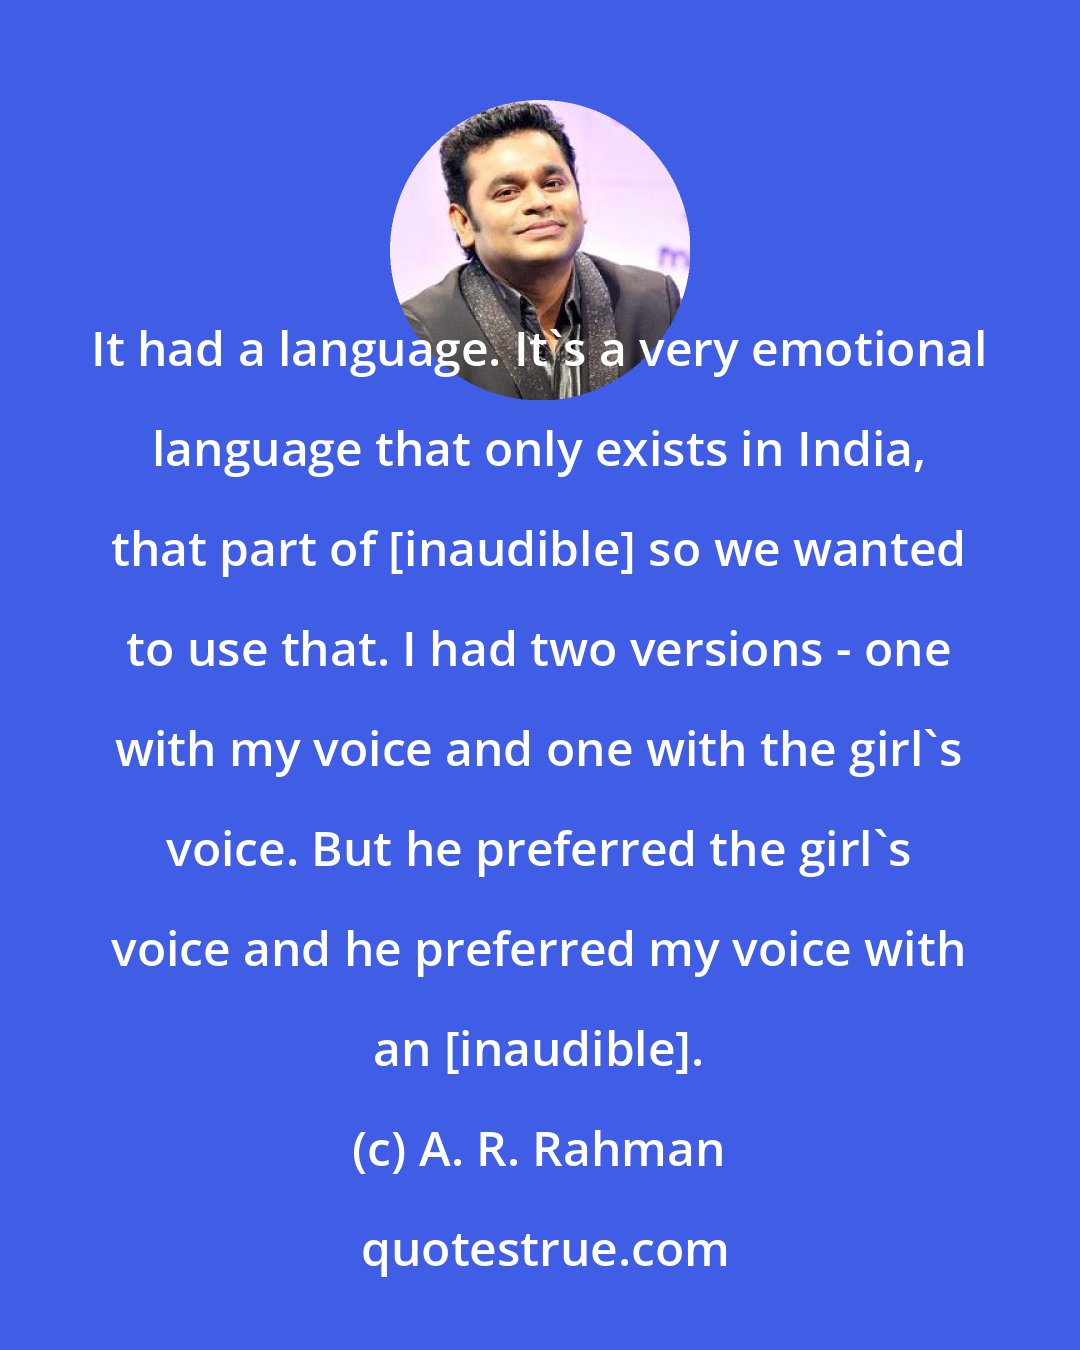 A. R. Rahman: It had a language. It's a very emotional language that only exists in India, that part of [inaudible] so we wanted to use that. I had two versions - one with my voice and one with the girl's voice. But he preferred the girl's voice and he preferred my voice with an [inaudible].